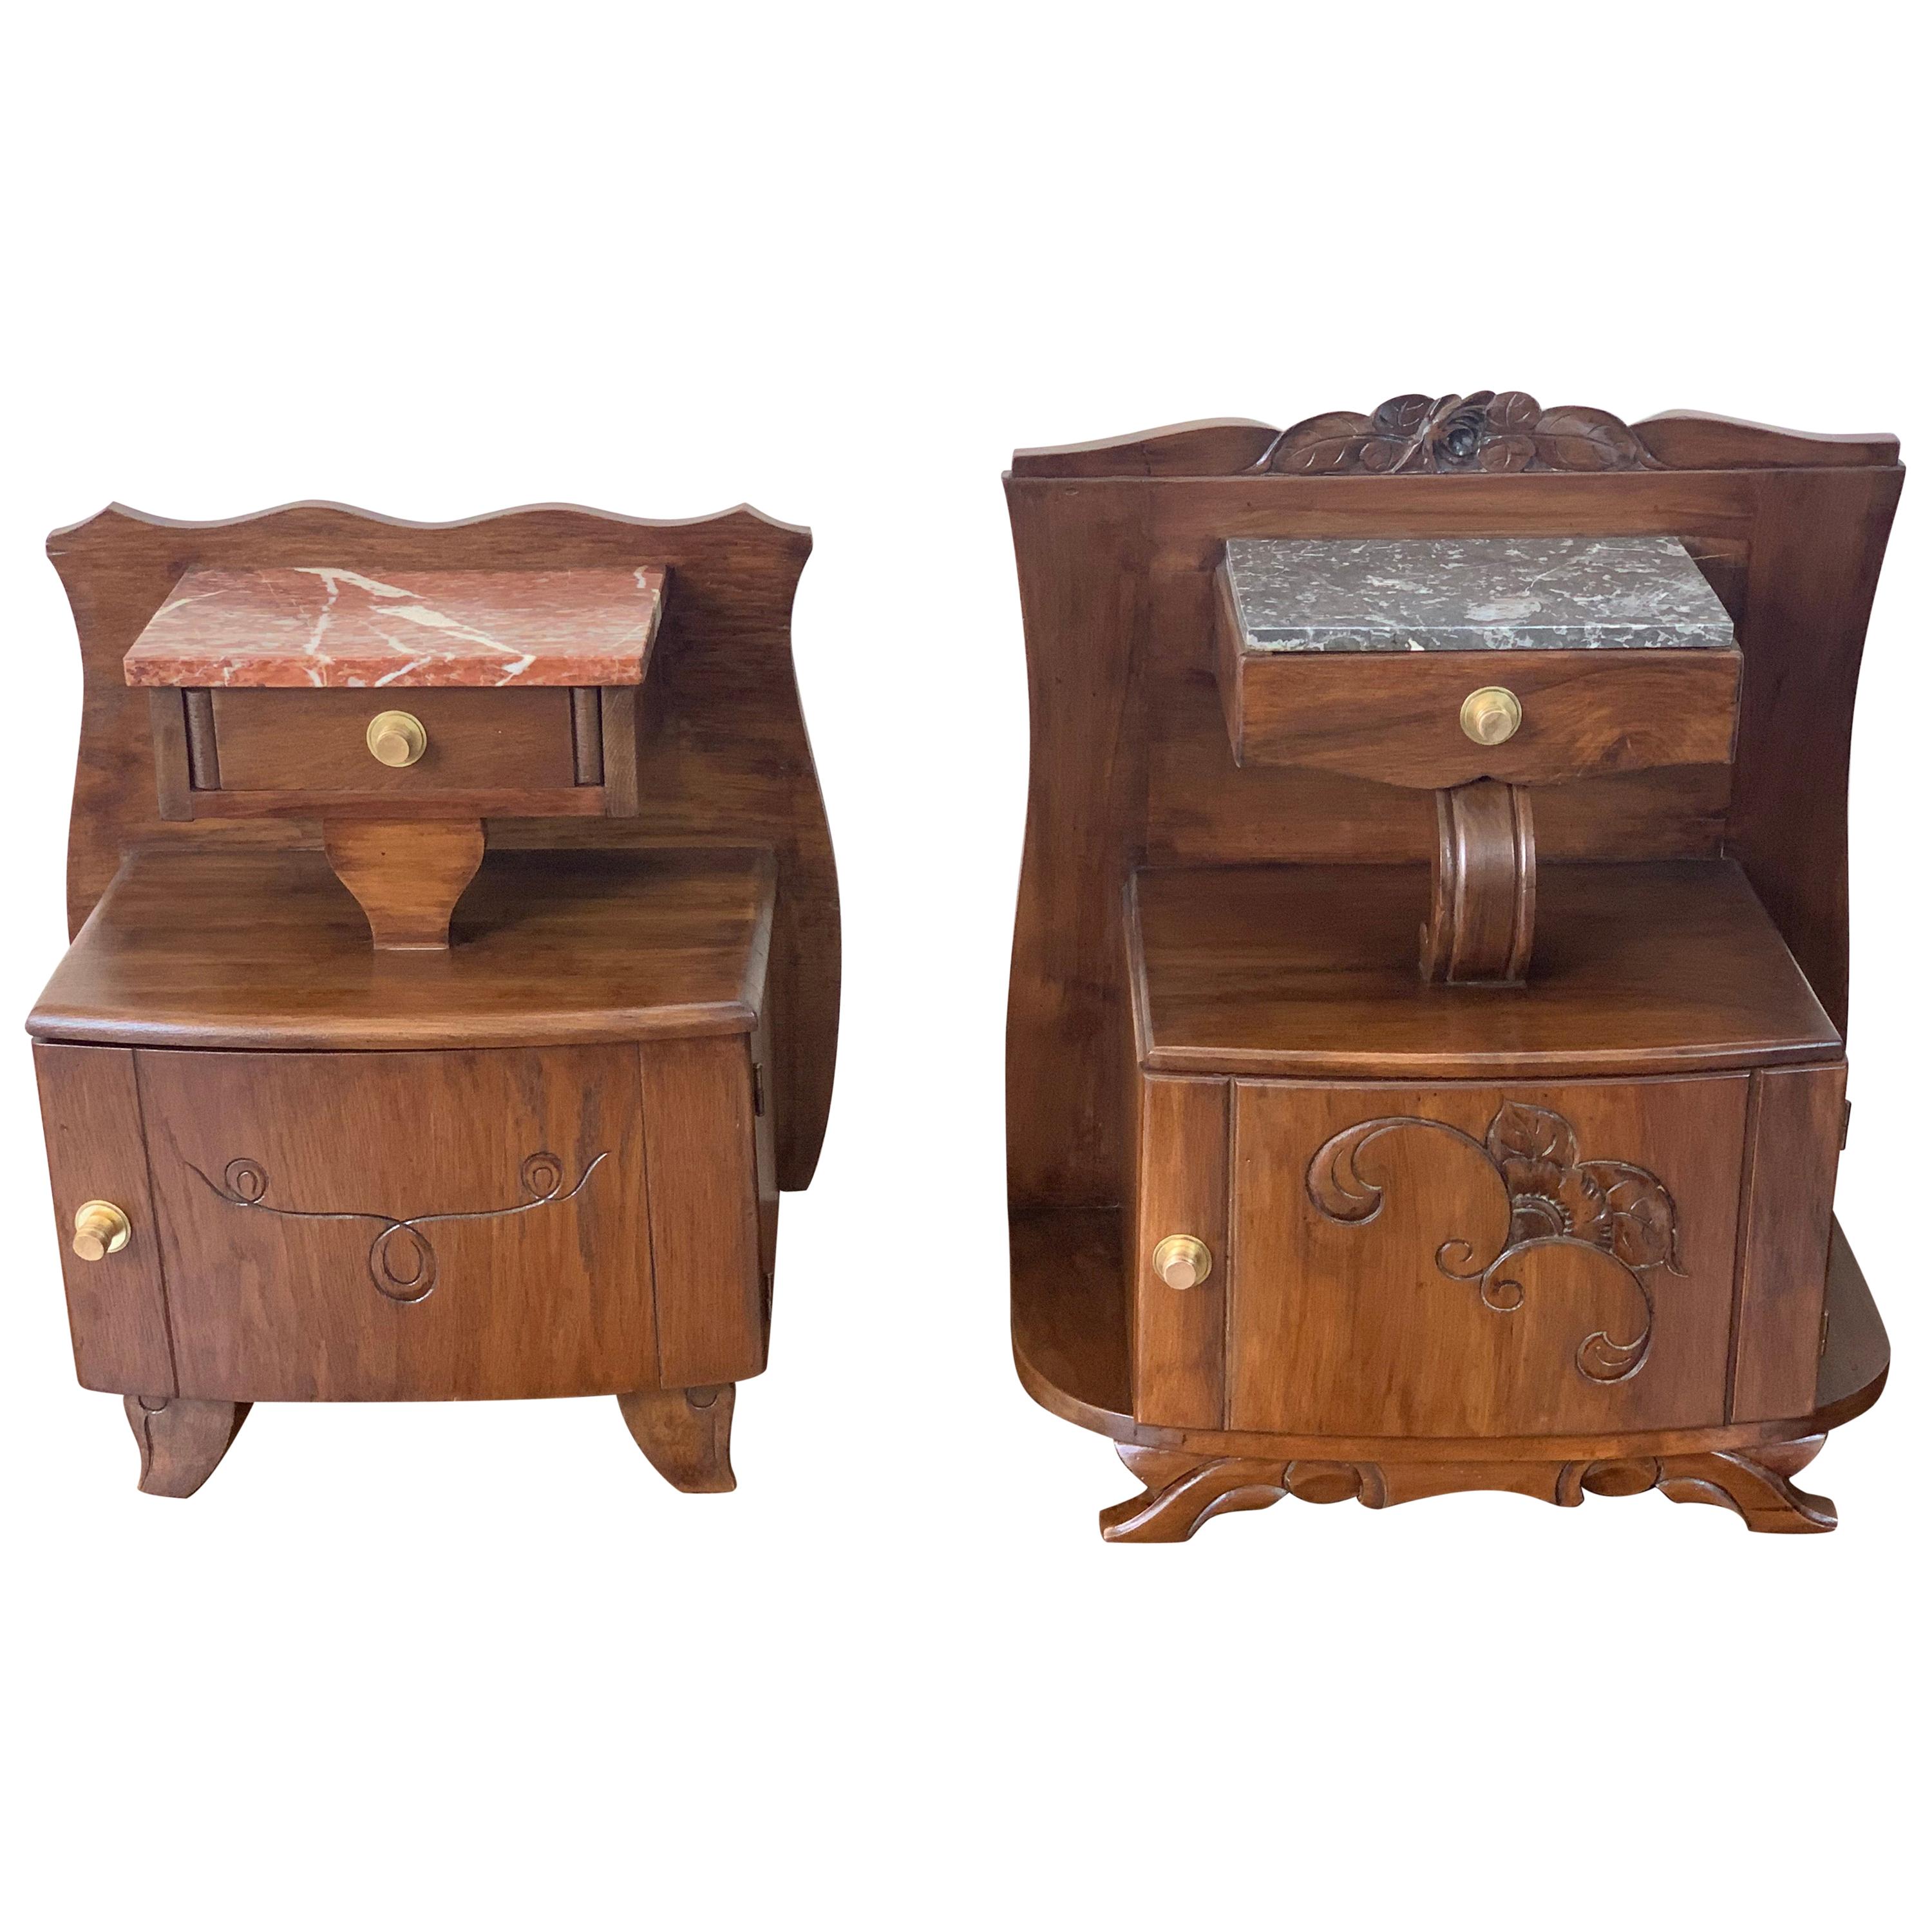 Art Nouveau Carved Nightstands / Bedside Tables with Marble Top, circa 1900